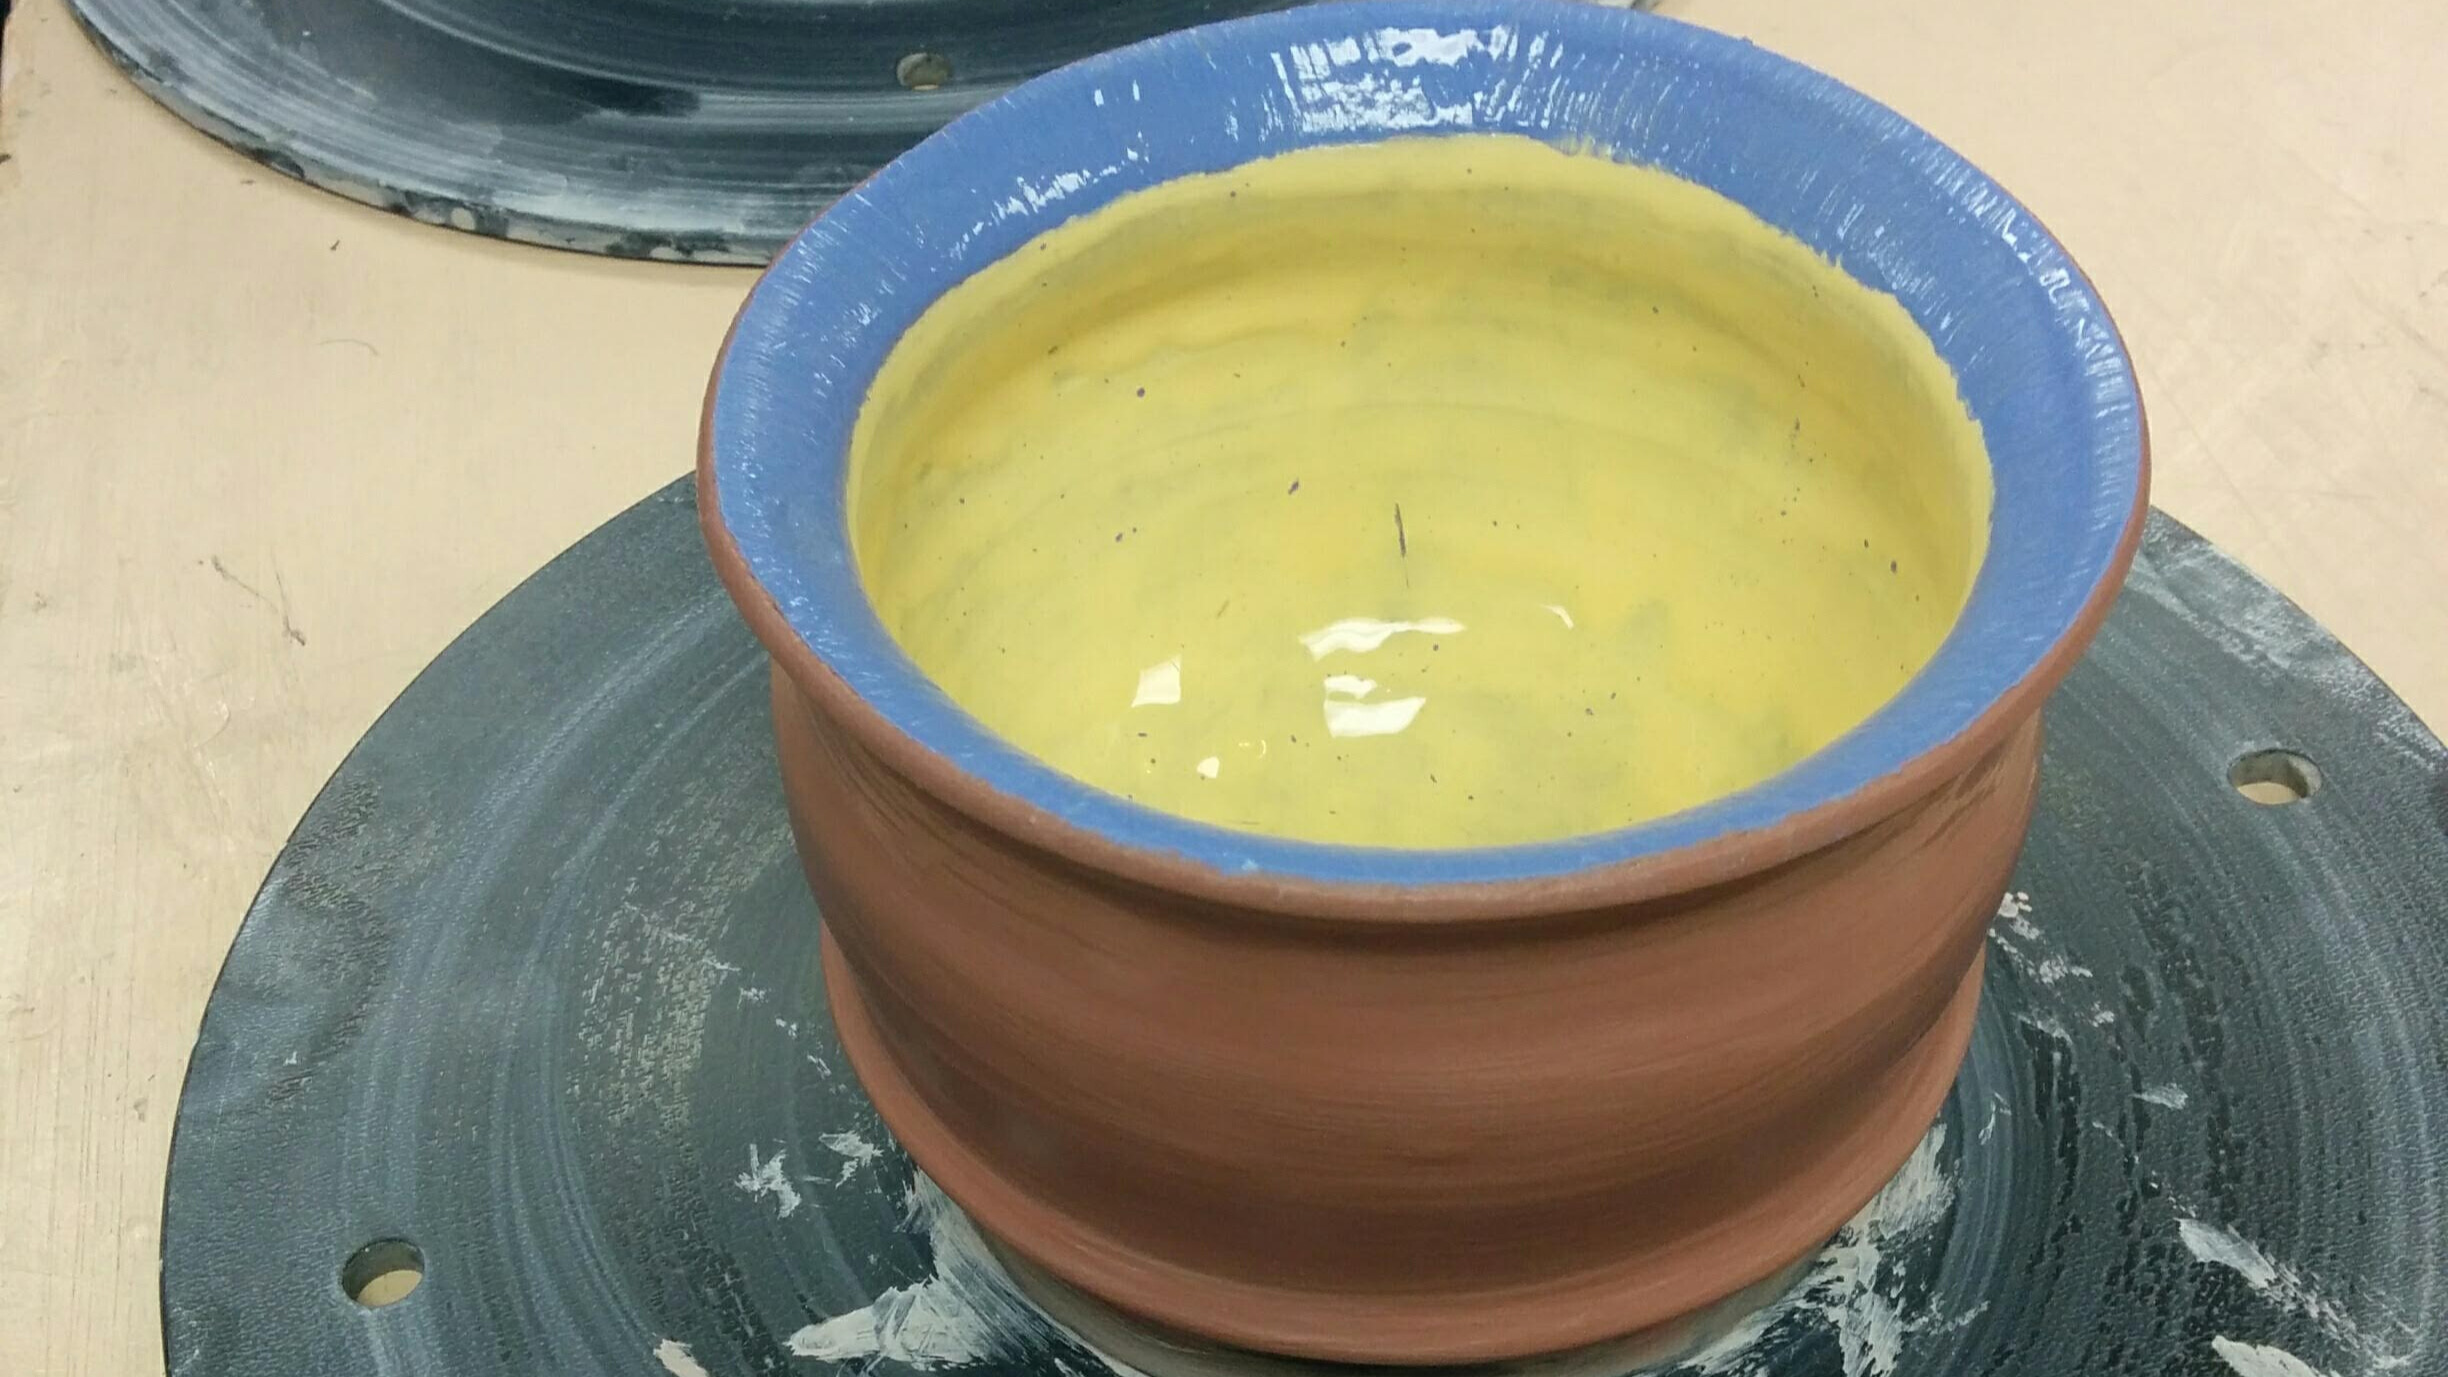 South Wood County Empty Bowls Event Hosted by FOCUS on February 17th